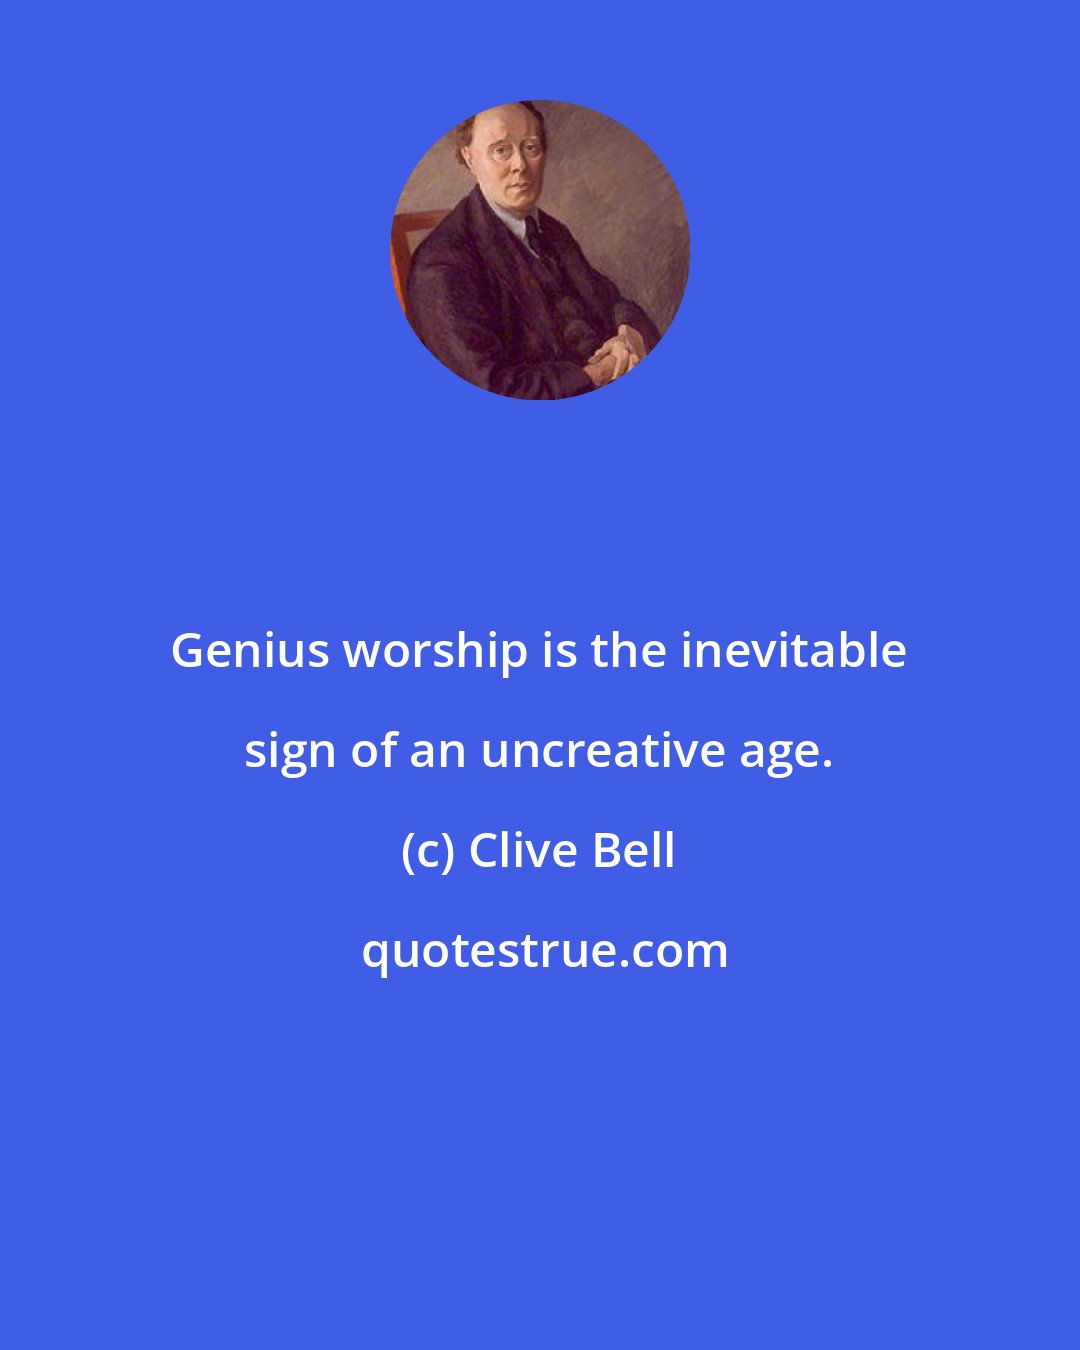 Clive Bell: Genius worship is the inevitable sign of an uncreative age.